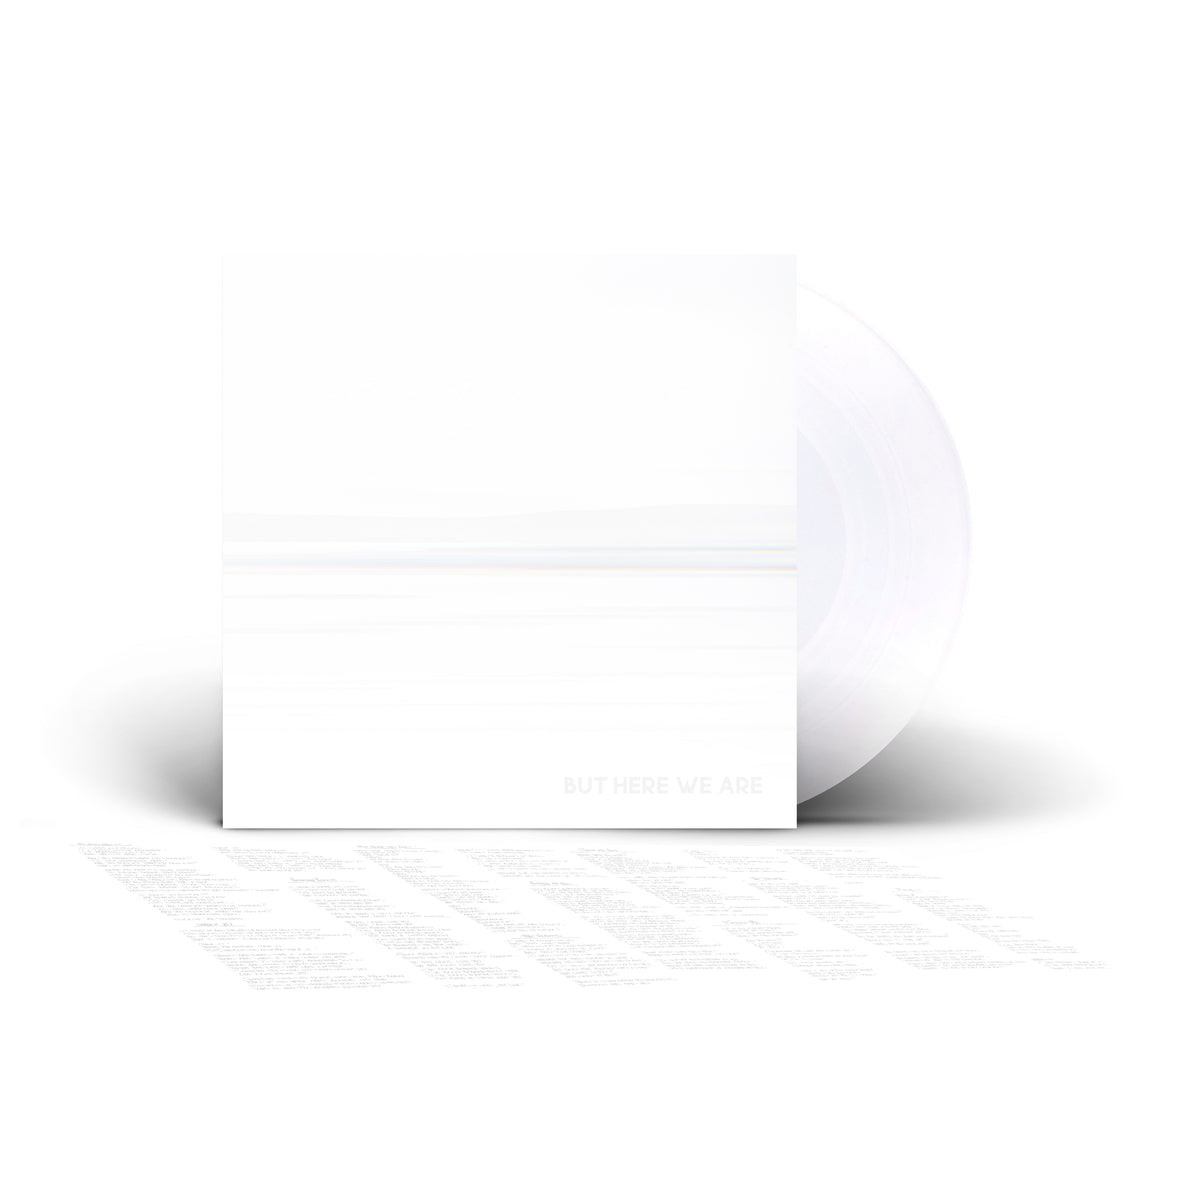 BUT HERE WE ARE (White Vinyl)